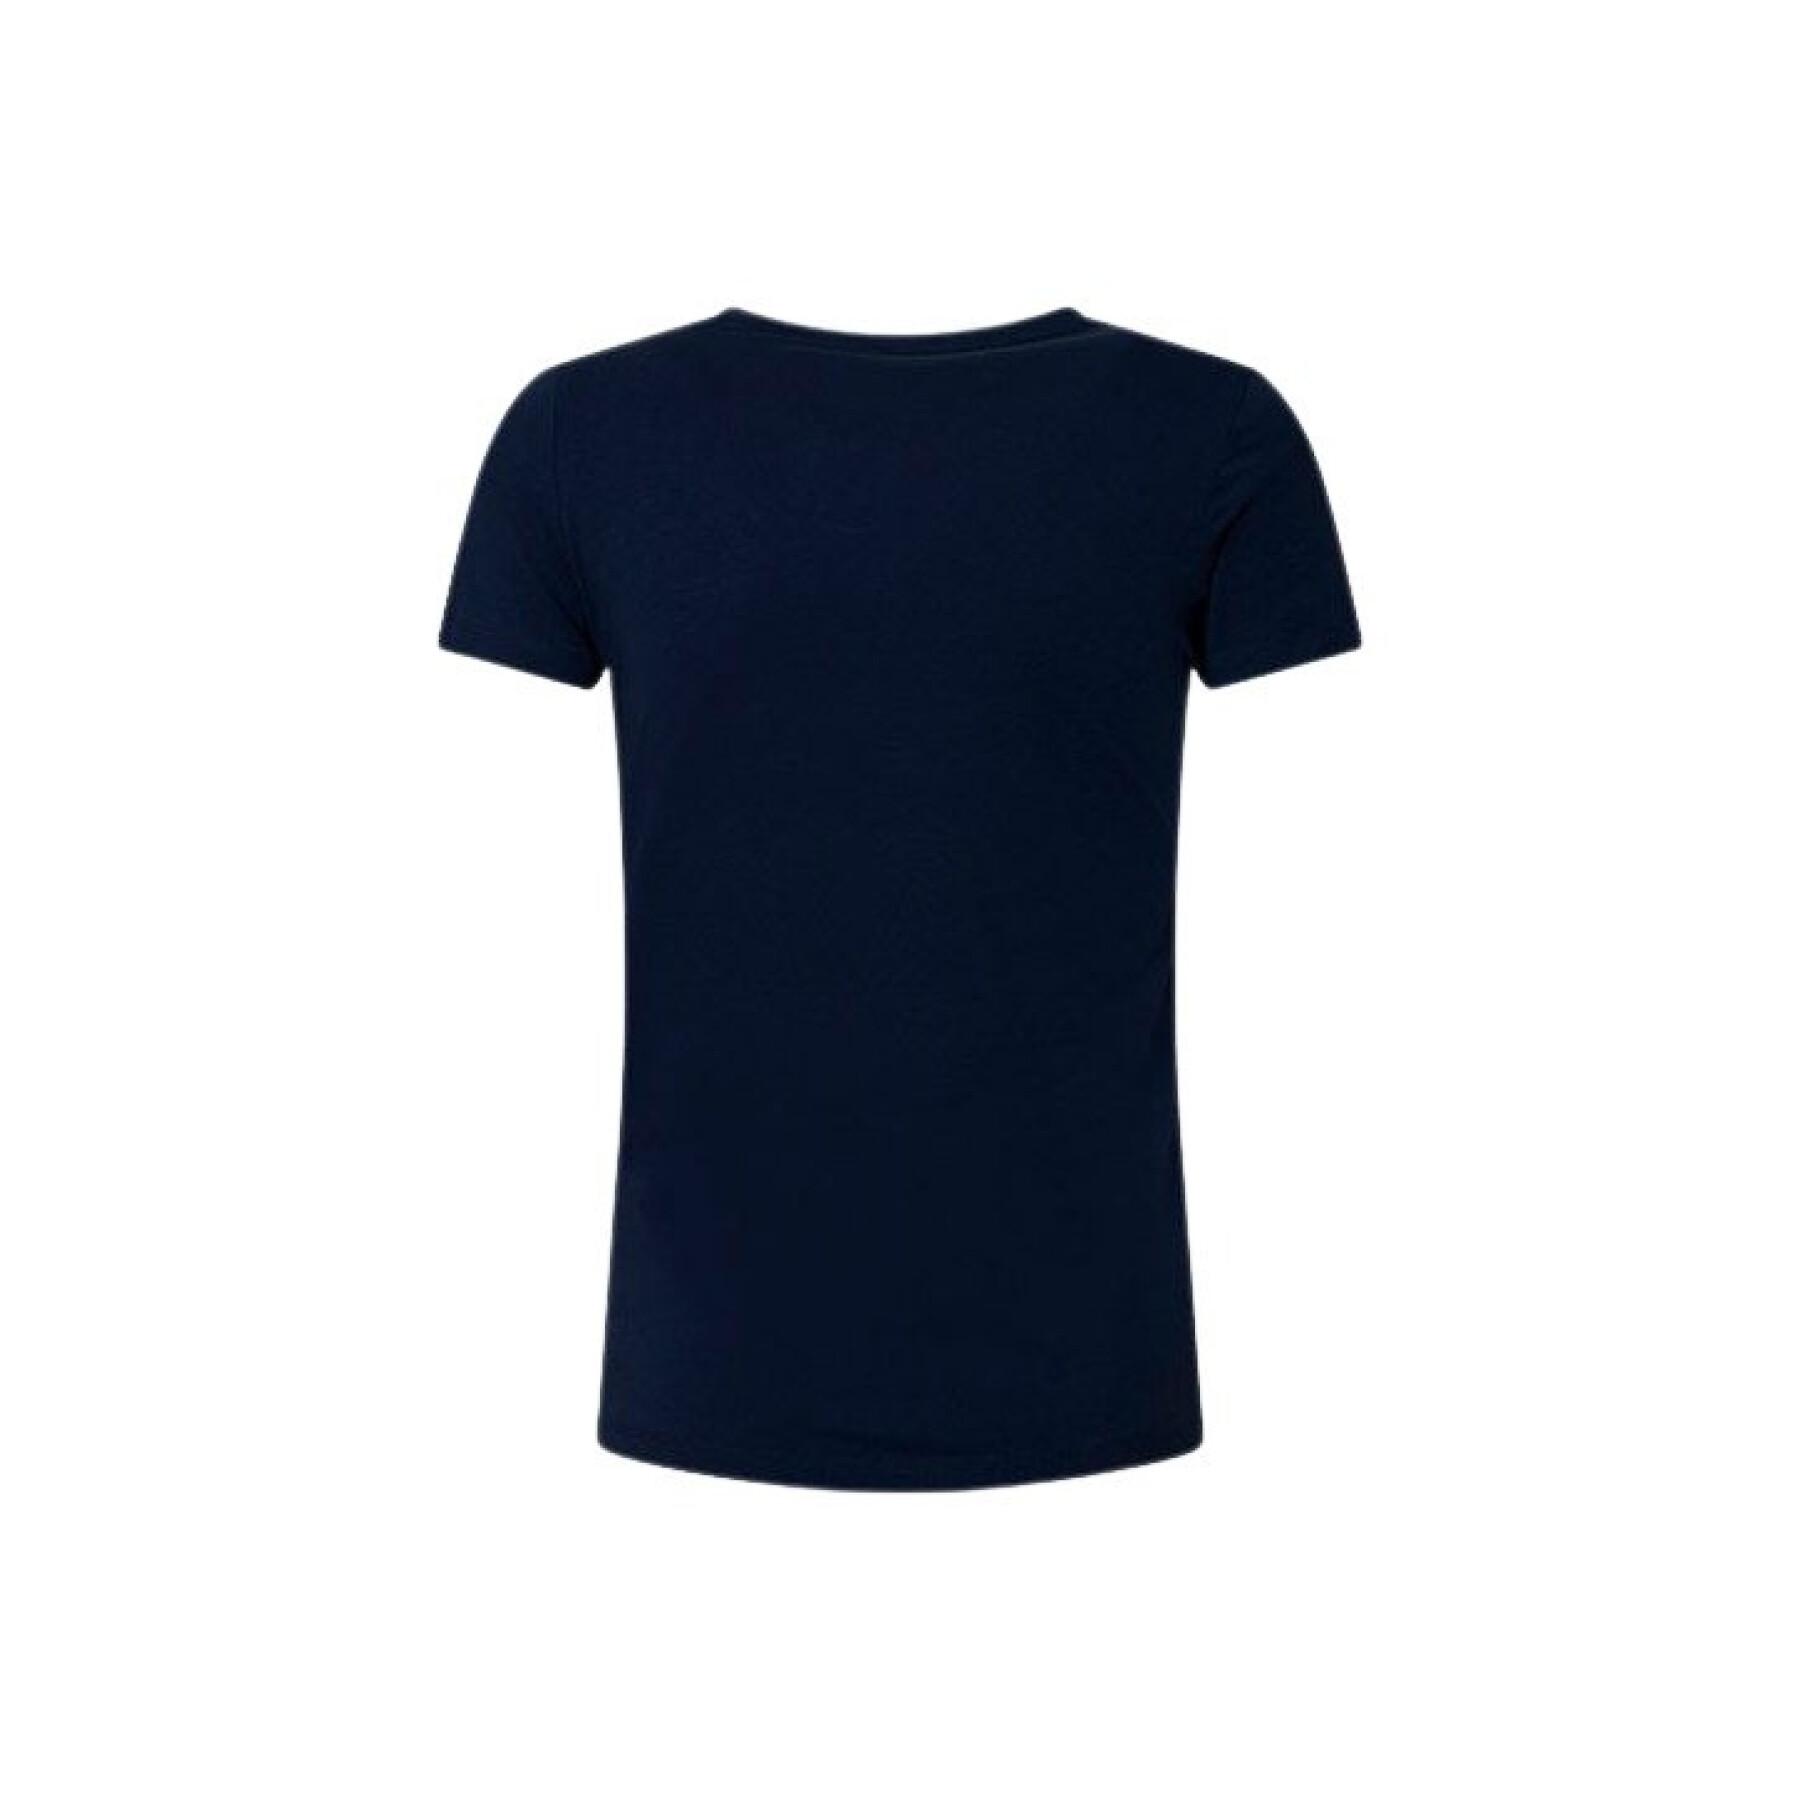 Women's T-shirt Pepe Jeans Bego